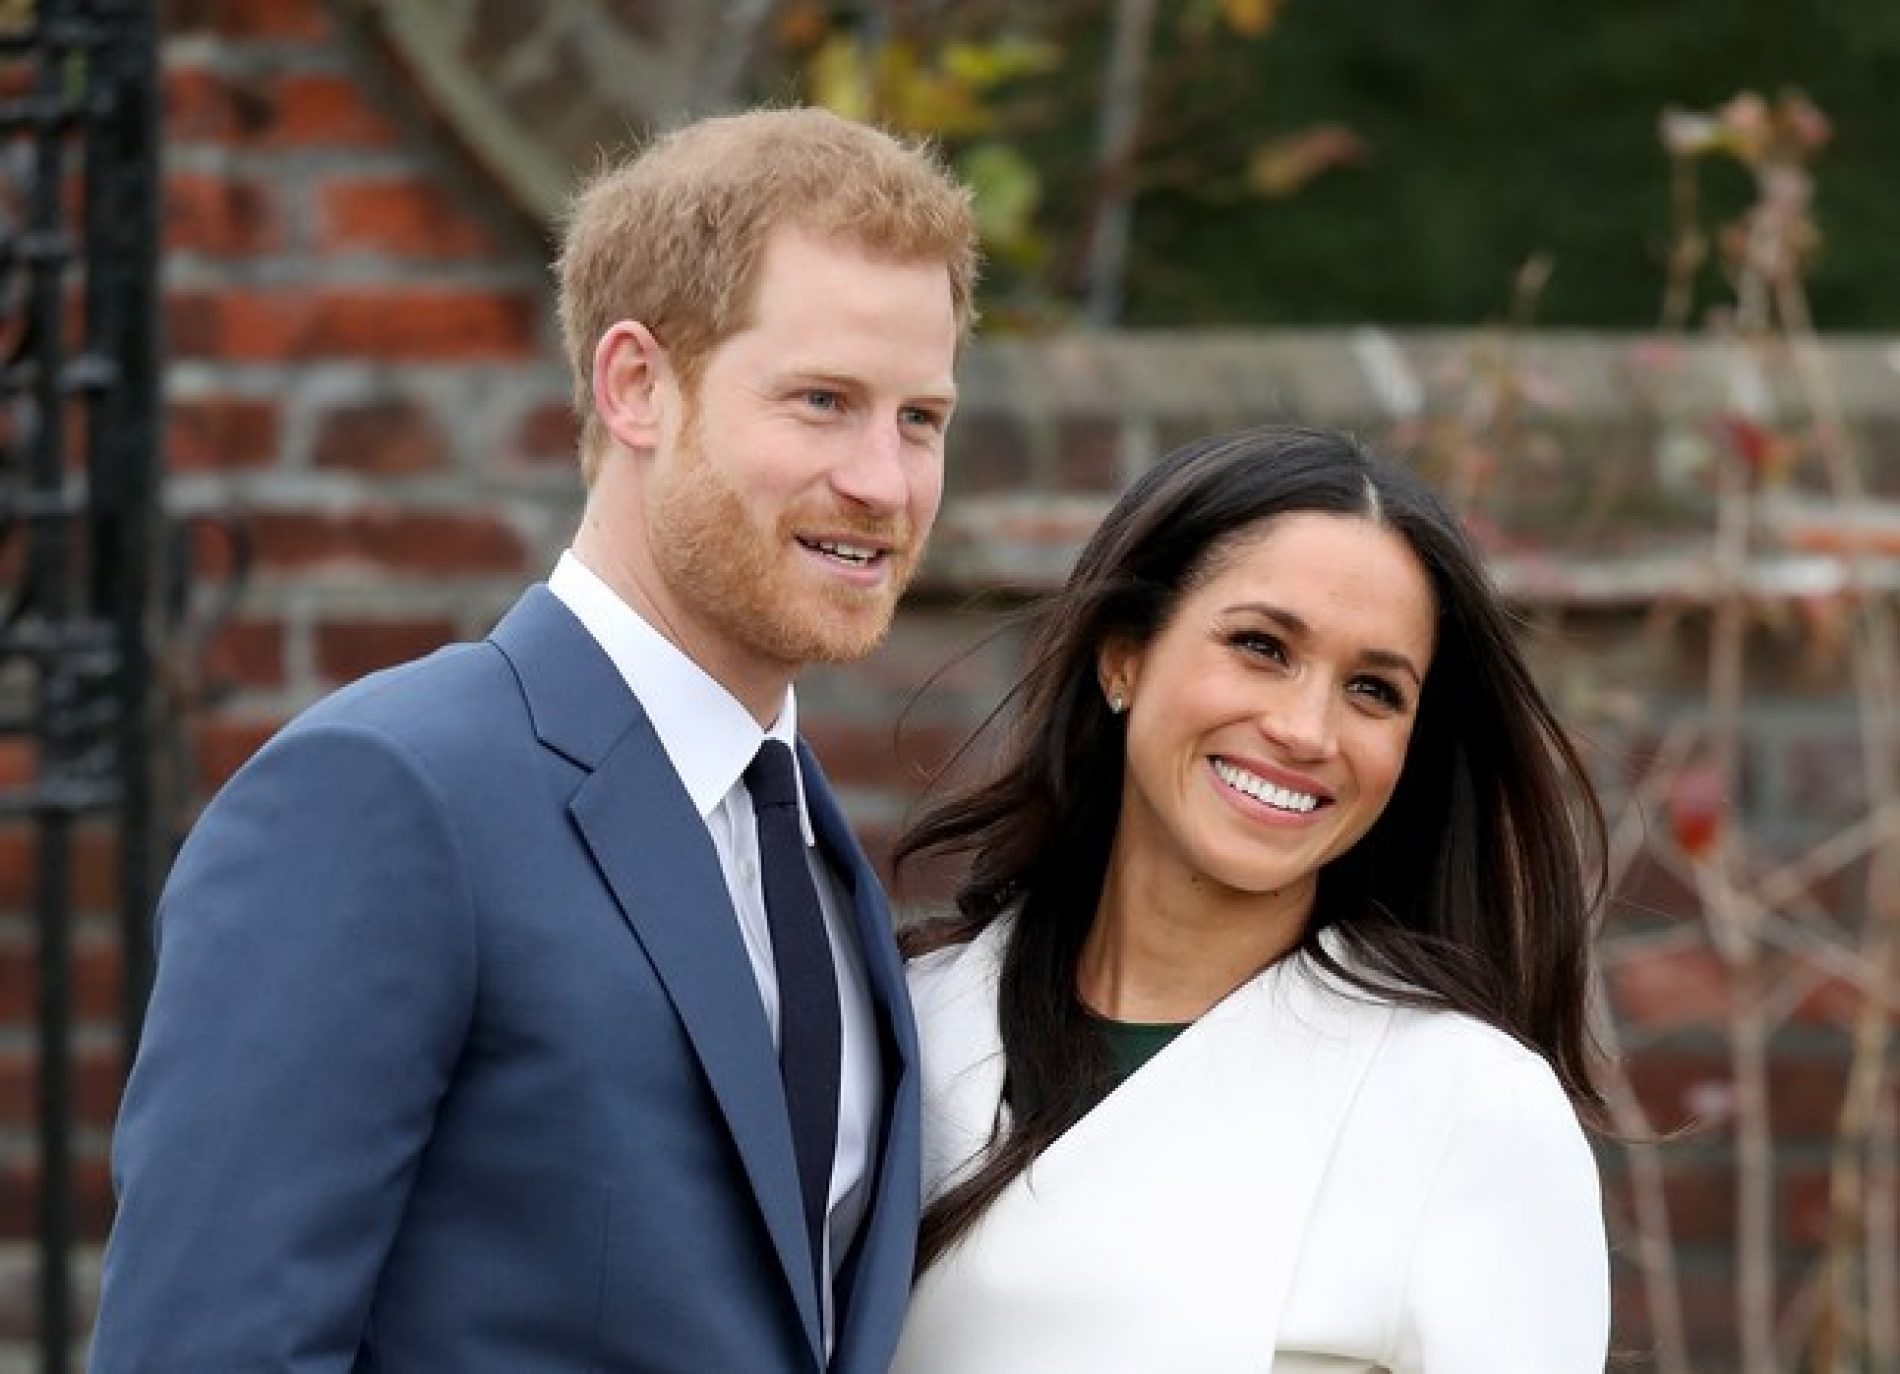 Prince Harry and Meghan Markle Are Stepping Down From Being Part Of The British Royal Family